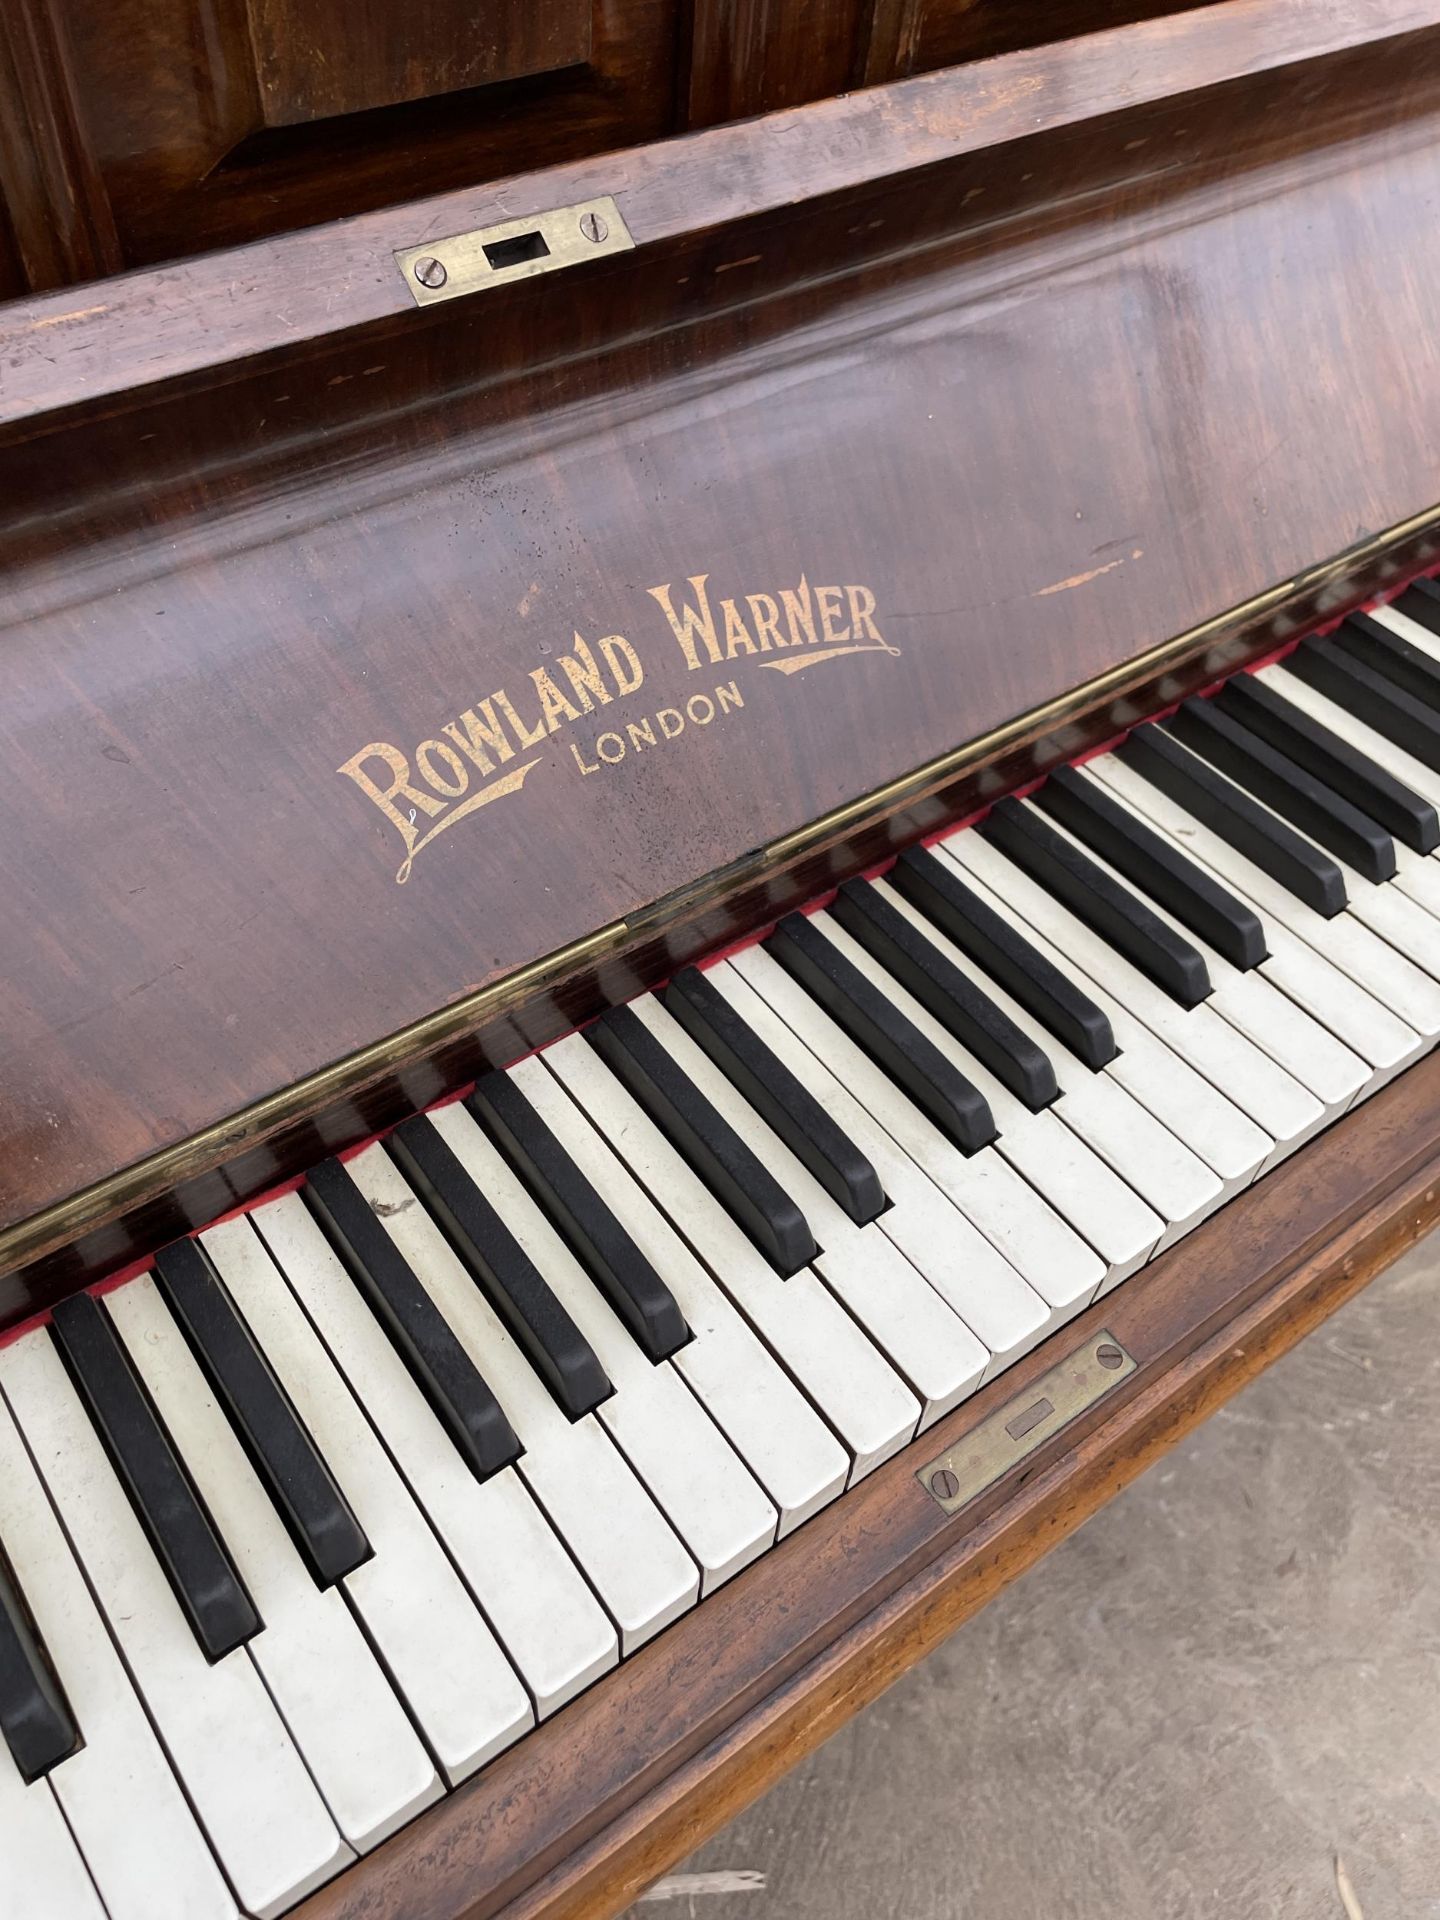 A ROLAND WARNER (LONDON) UPRIGHT PIANO - Image 3 of 4